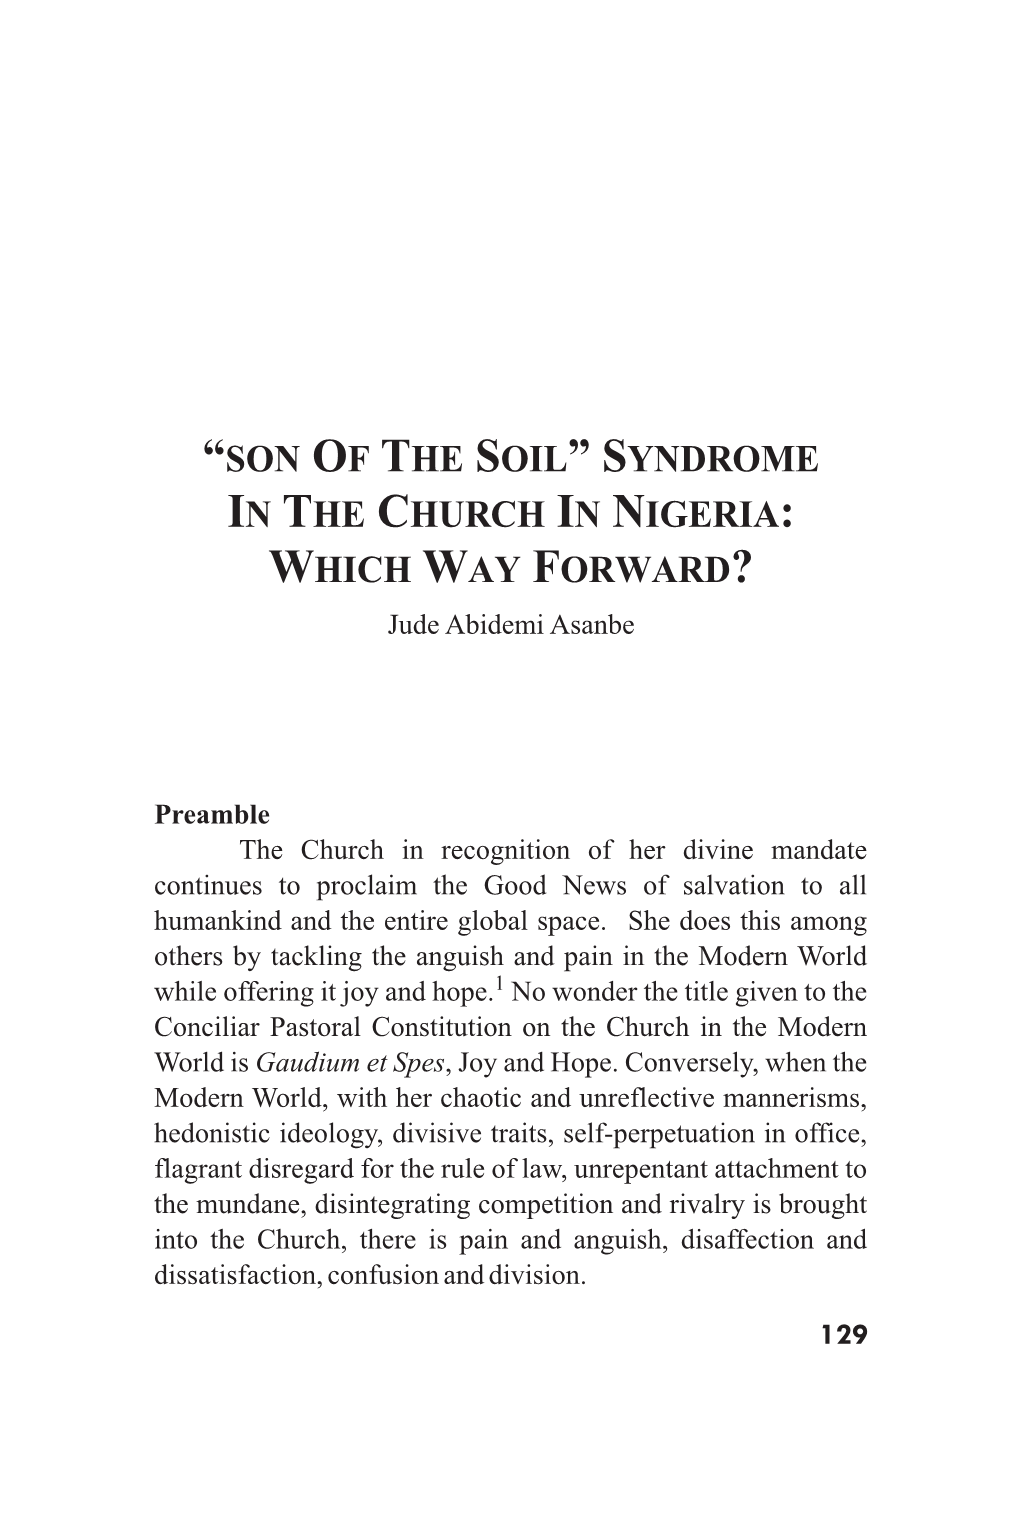 “SON of the SOIL” SYNDROME in the CHURCH in NIGERIA: WHICH WAY FORWARD? Jude Abidemi Asanbe